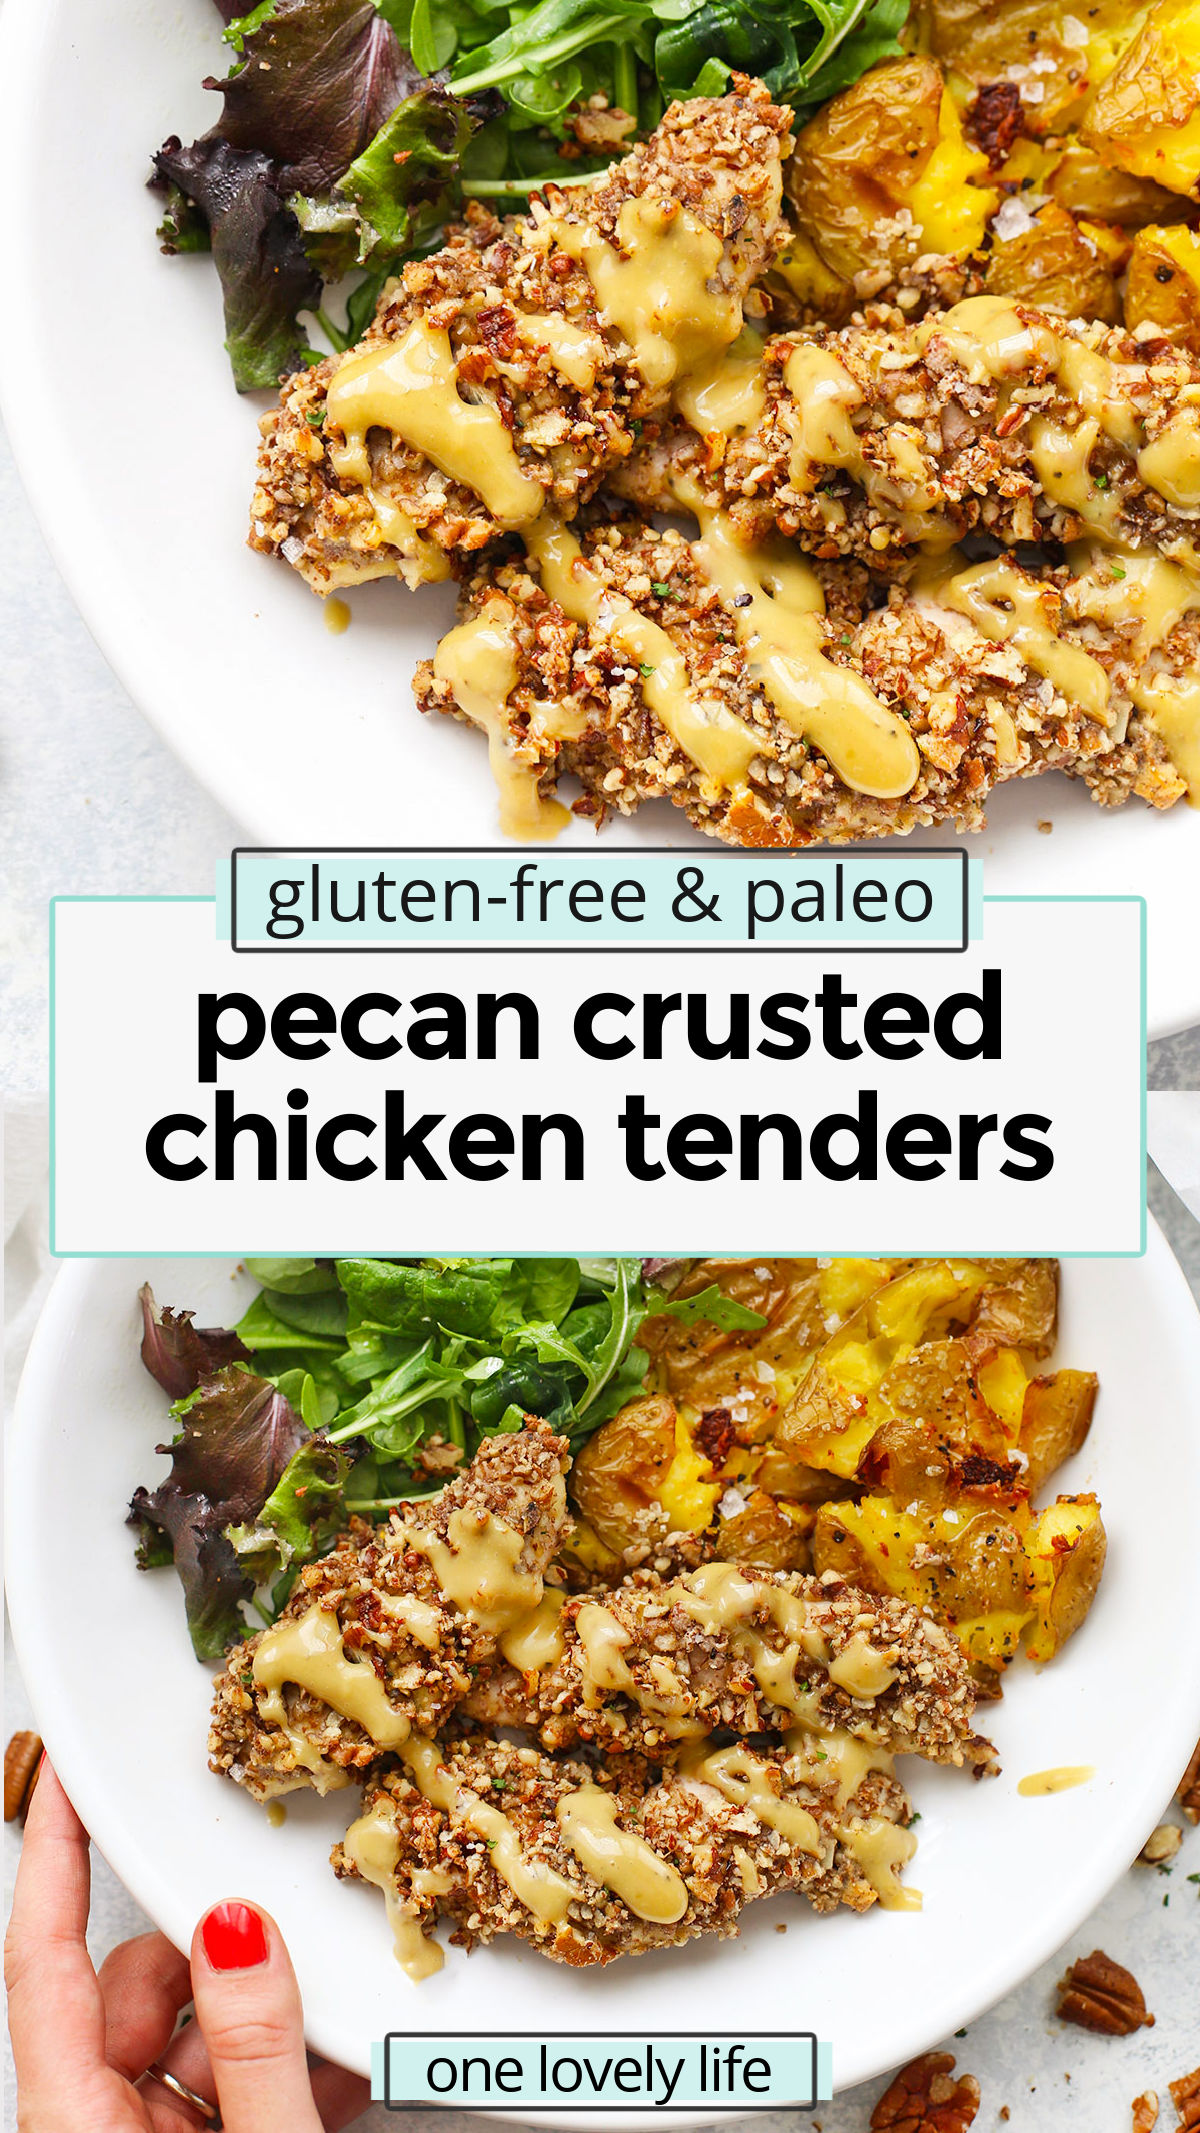 Pecan Crusted Chicken Tenders (Gluten Free, Paleo Friendly) - Savory chicken tenders with a crunchy pecan coating. Quick, easy & yummy! // Pecan Chicken Tenders // paleo pecan chicken tenders // healthy pecan chicken tenders // healthy chicken tenders // easy chicken recipe // paleo dinner // chicken tenders recipe // gluten free pecan chicken tenders